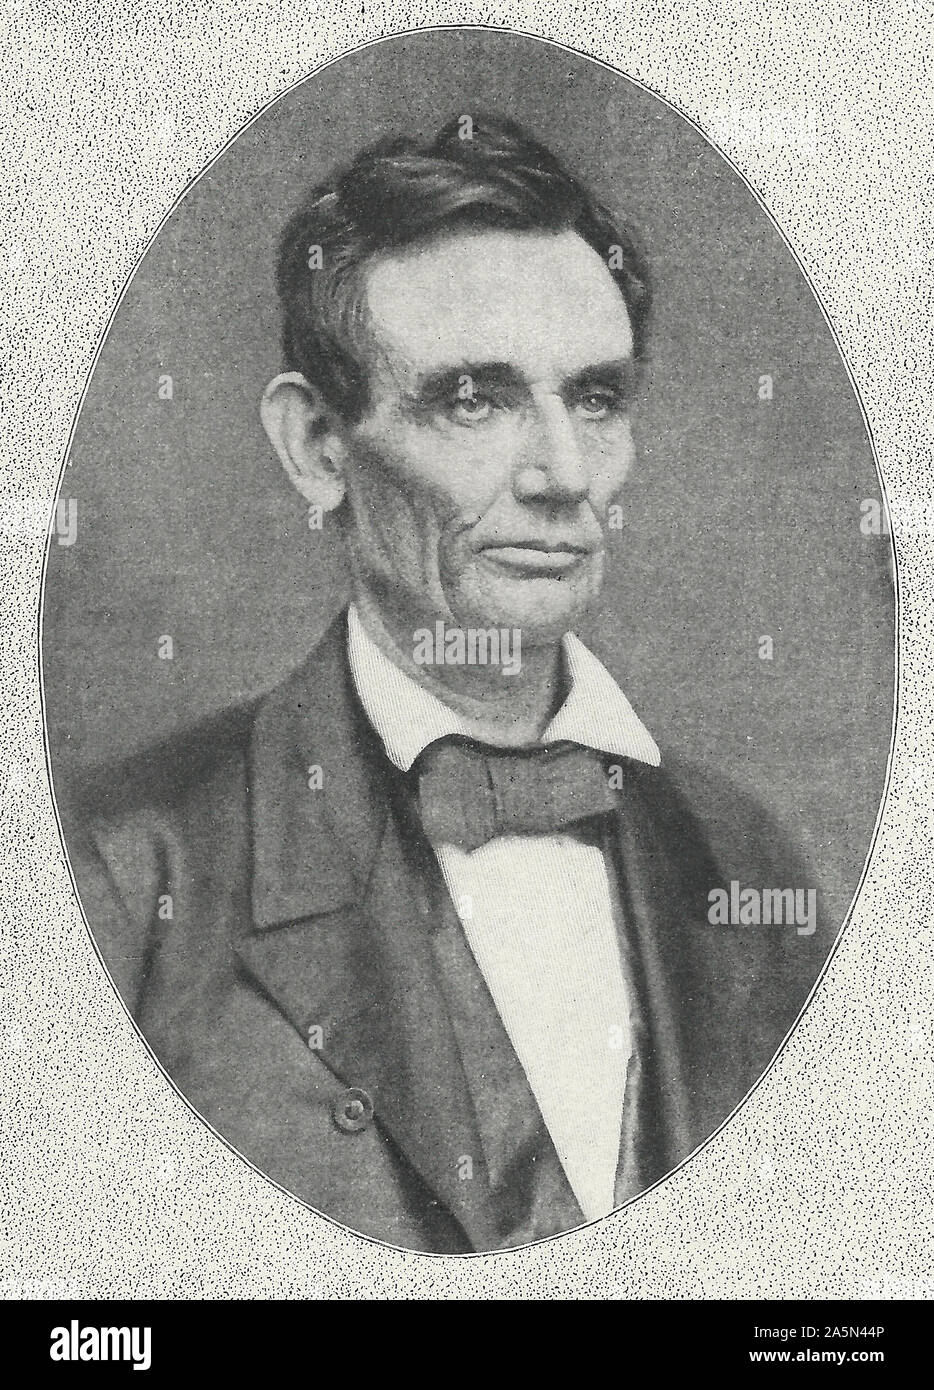 Photograph of President Abraham Lincoln in the 1850s Stock Photo